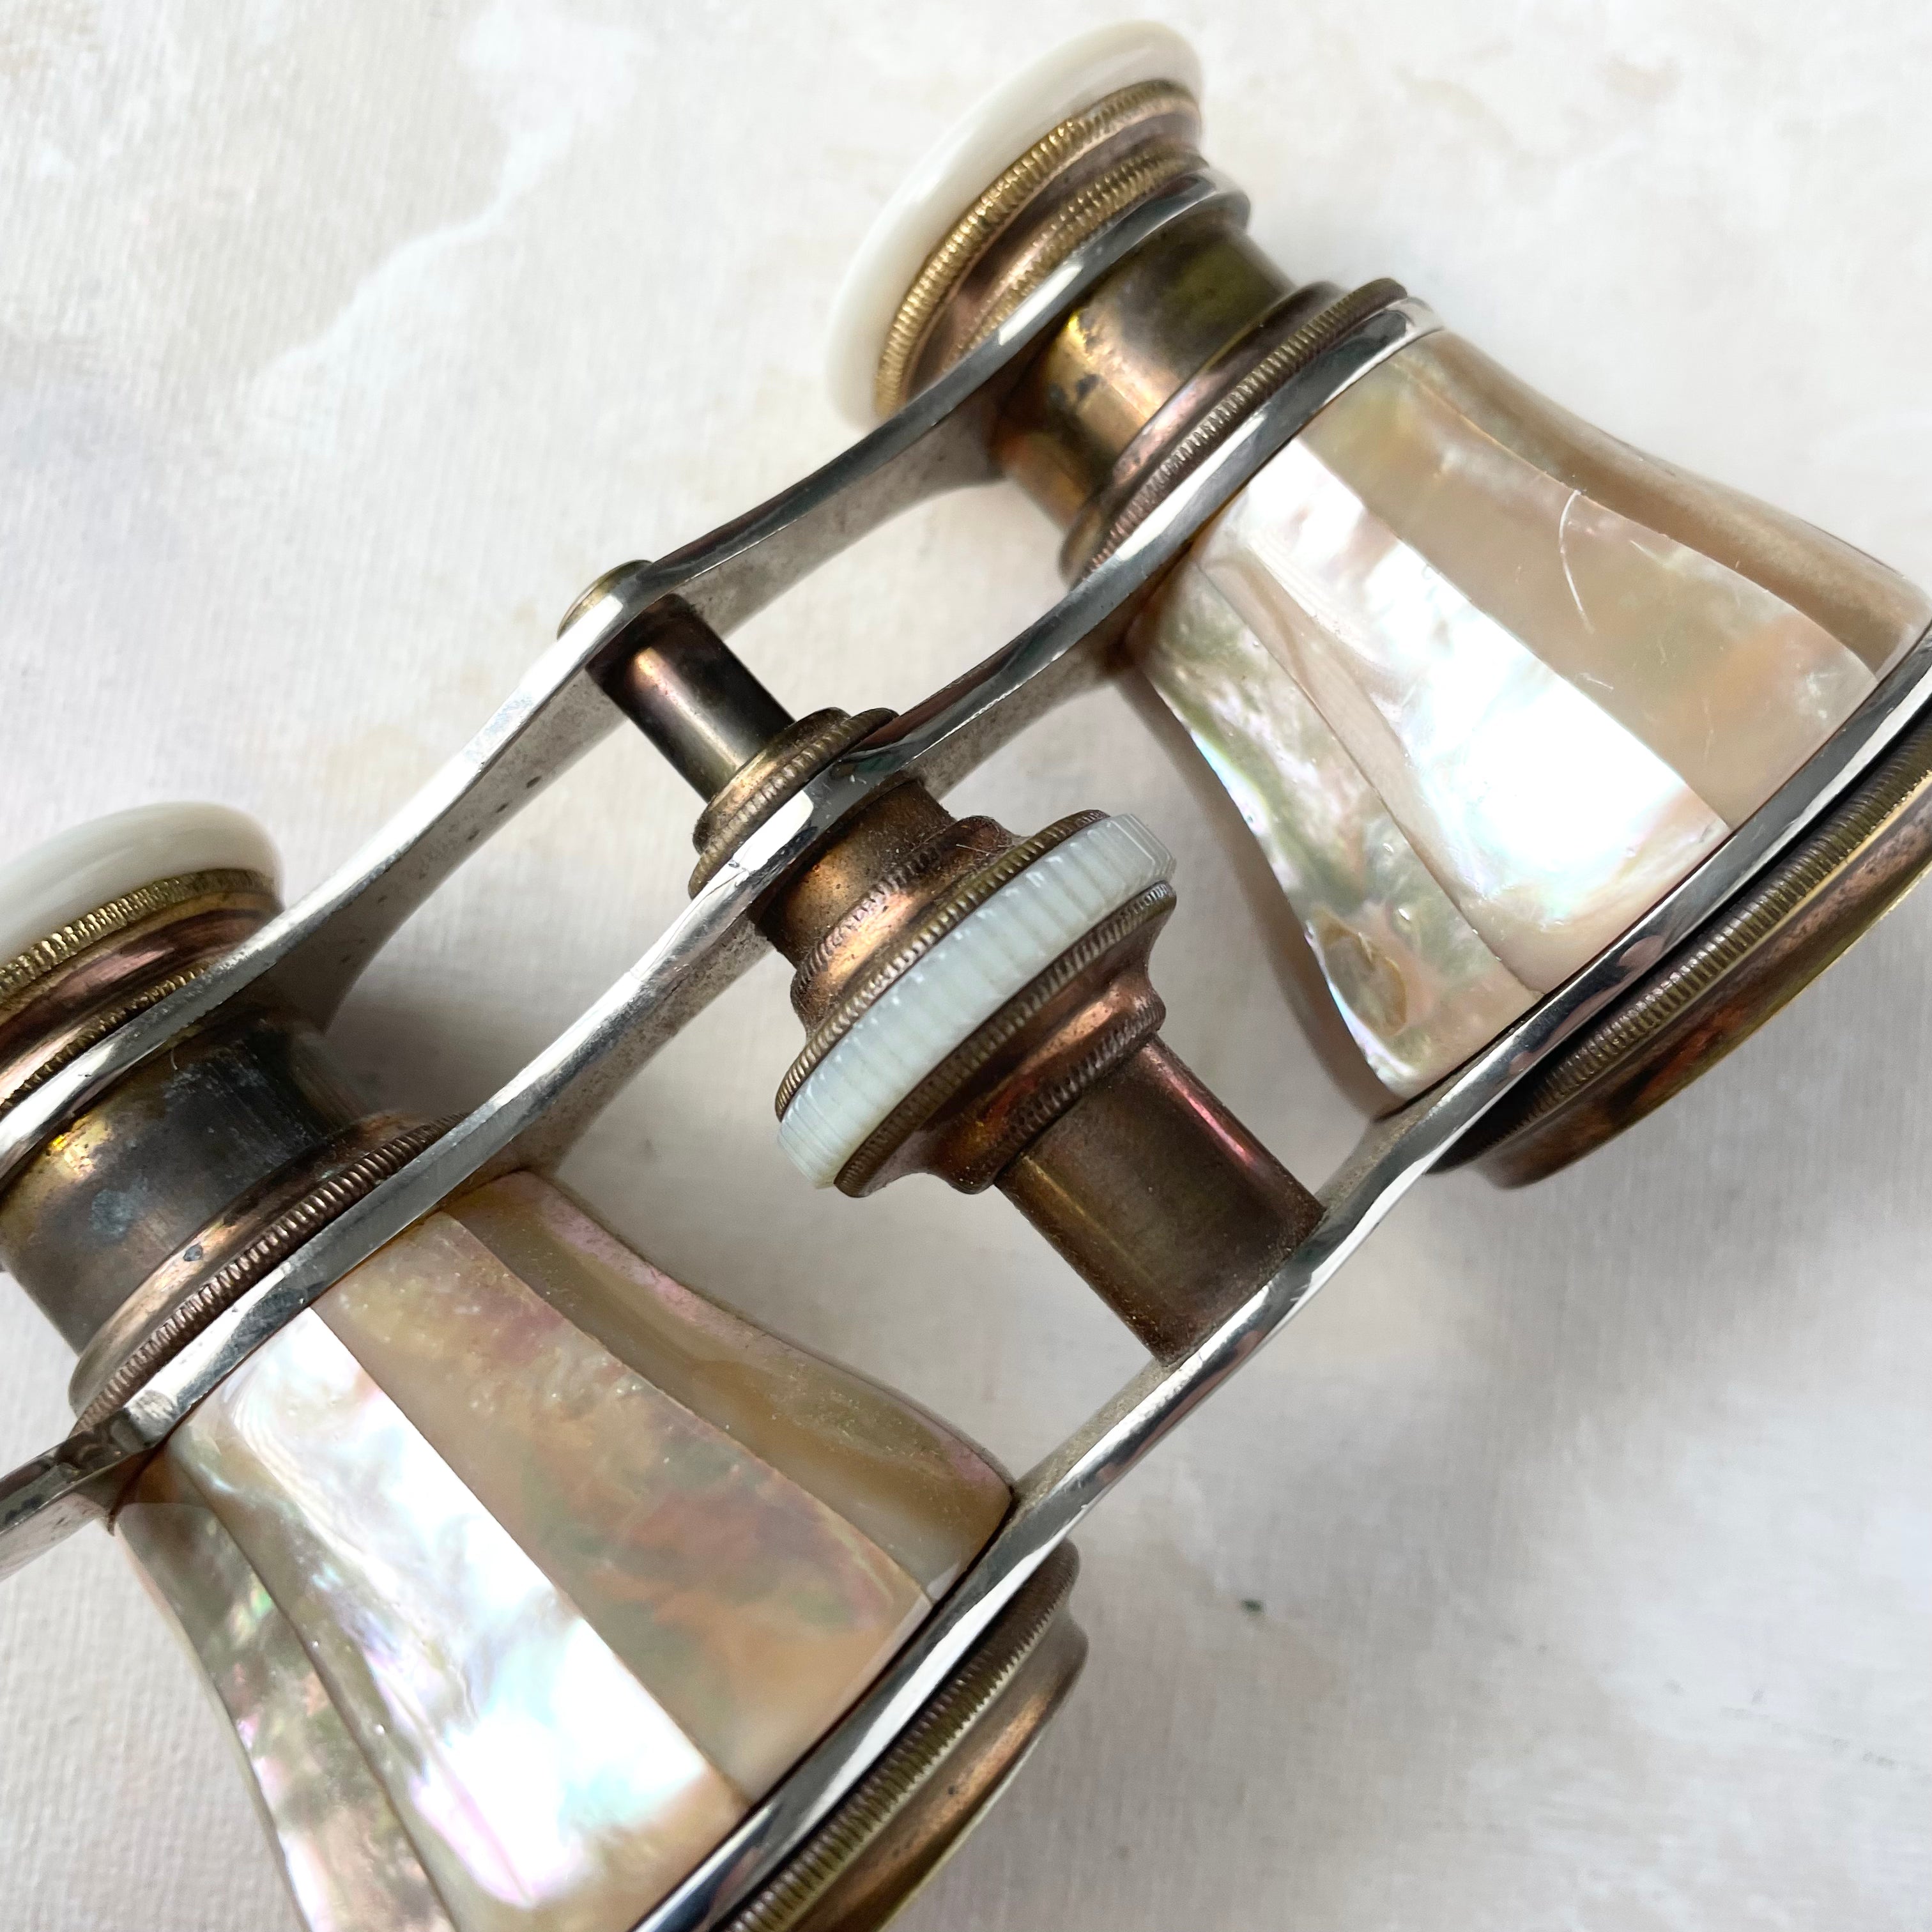 Gold Mother of Pearl Opera Glasses with Handle -  Opera Glasses